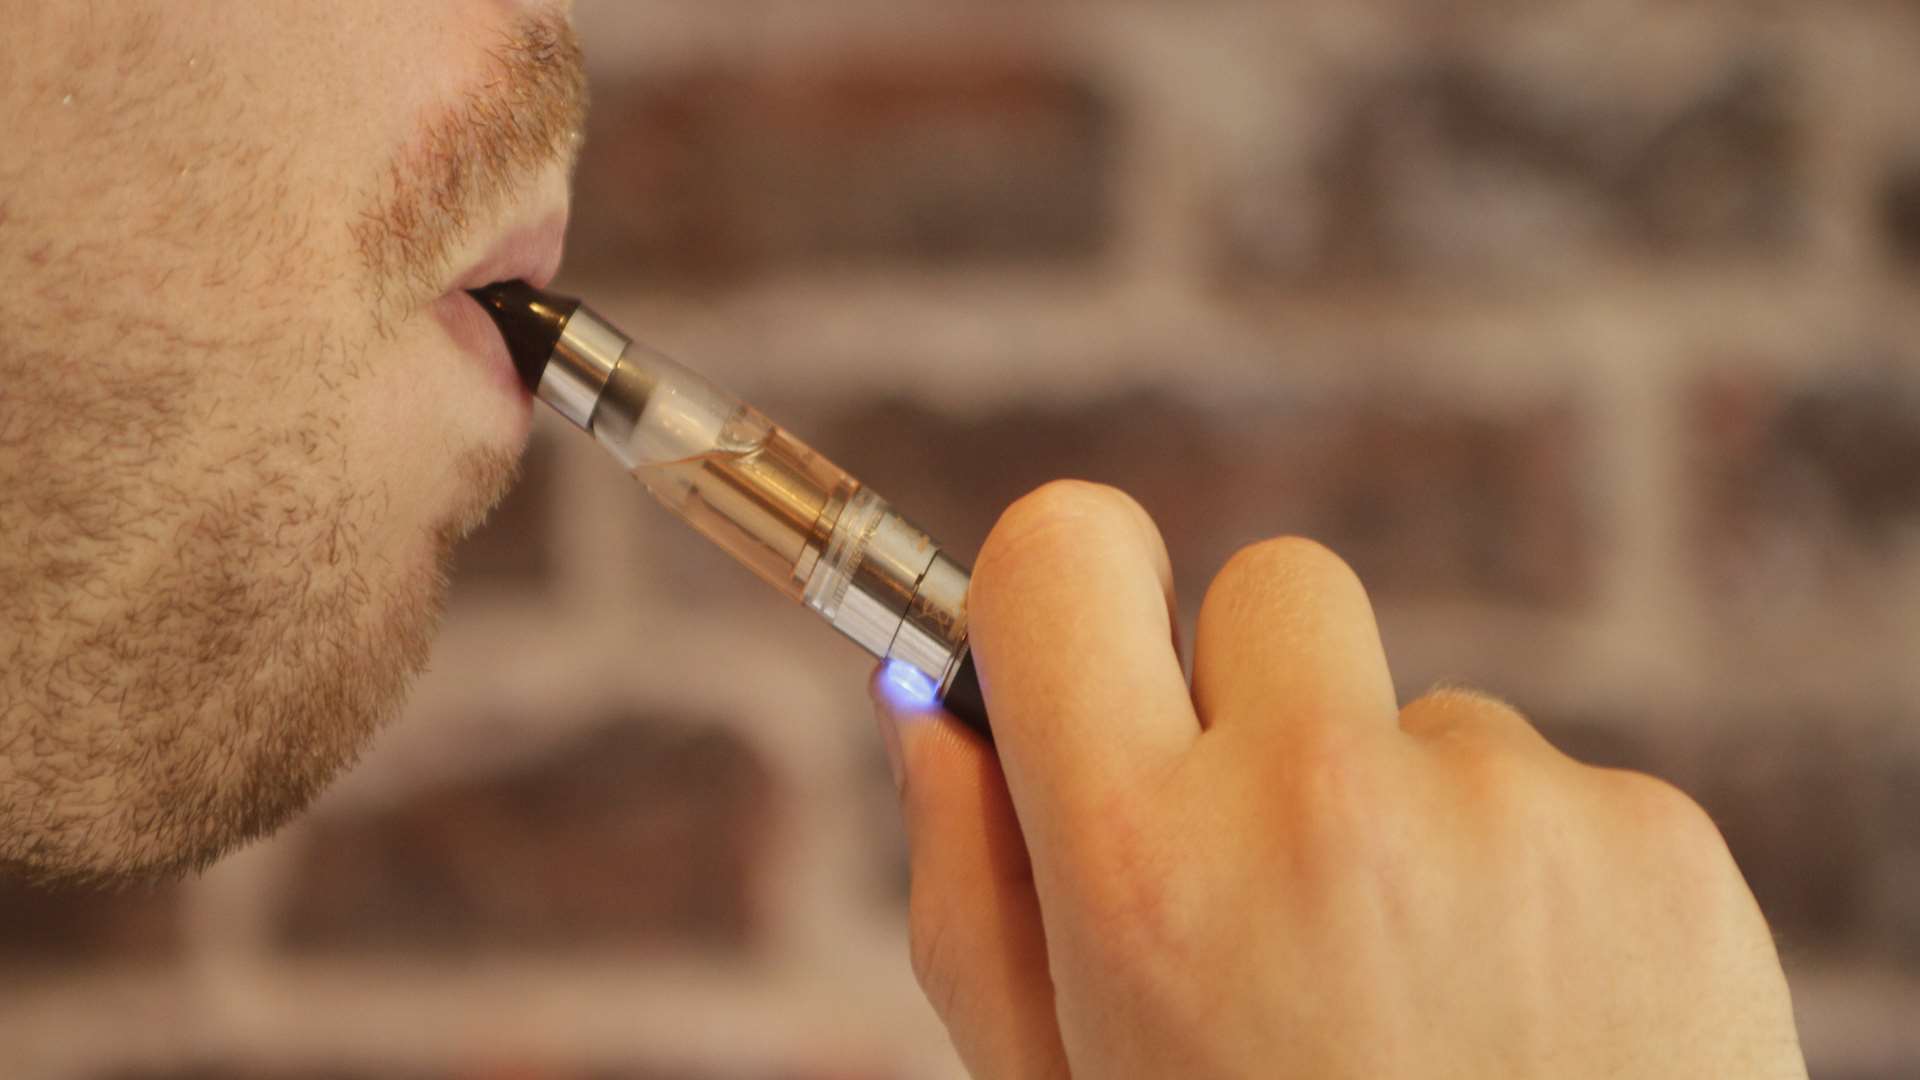 E-cigarettes work by evaporating liquid containing nicotine, creating a vapor which can be inhaled